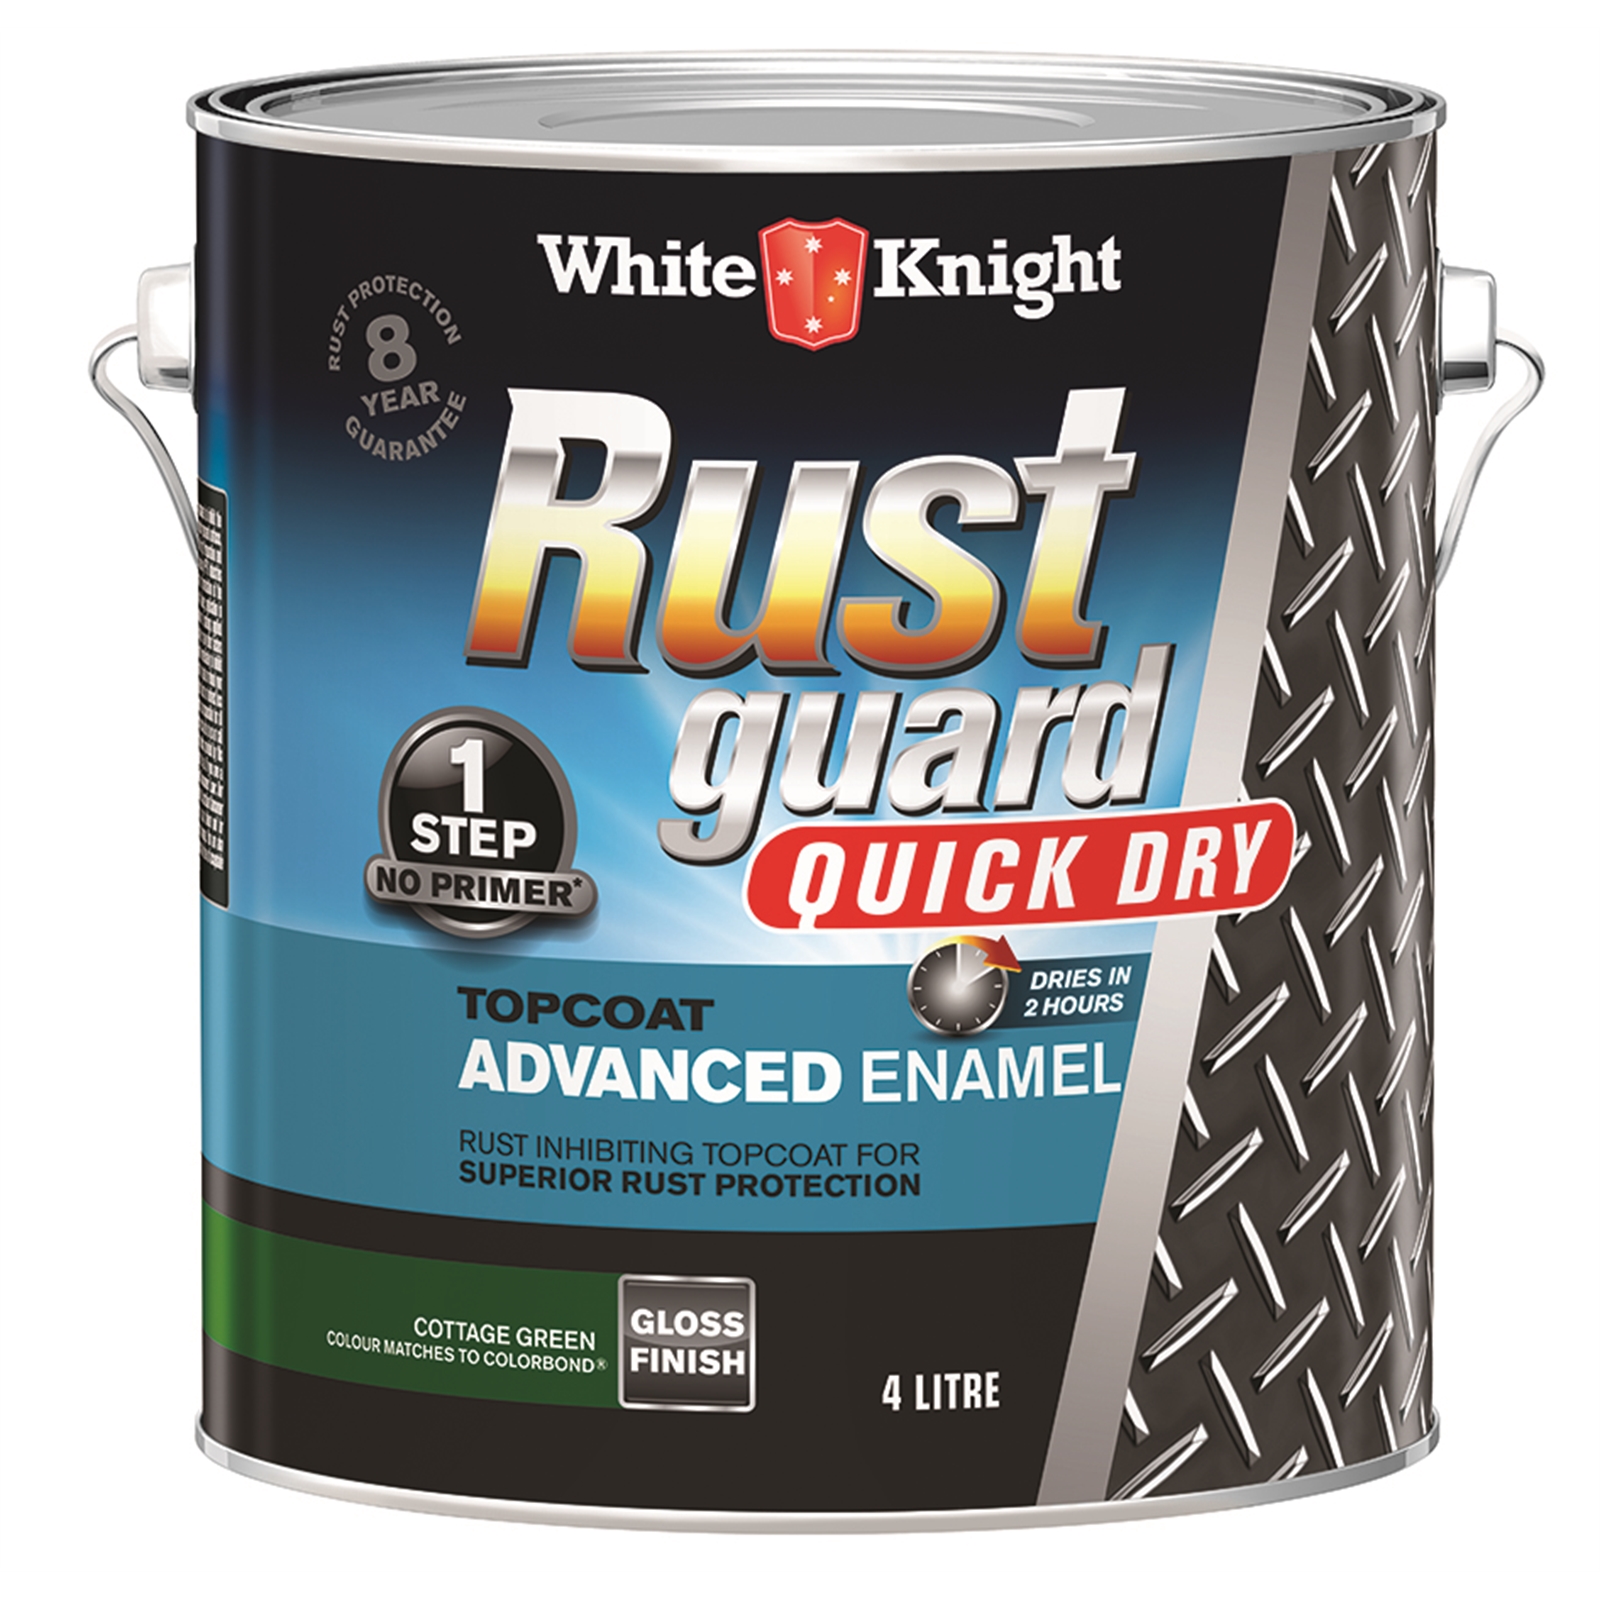 White Knight Rust 4L Guard Quick Dry Advanced Enamel Gloss Cottage Green